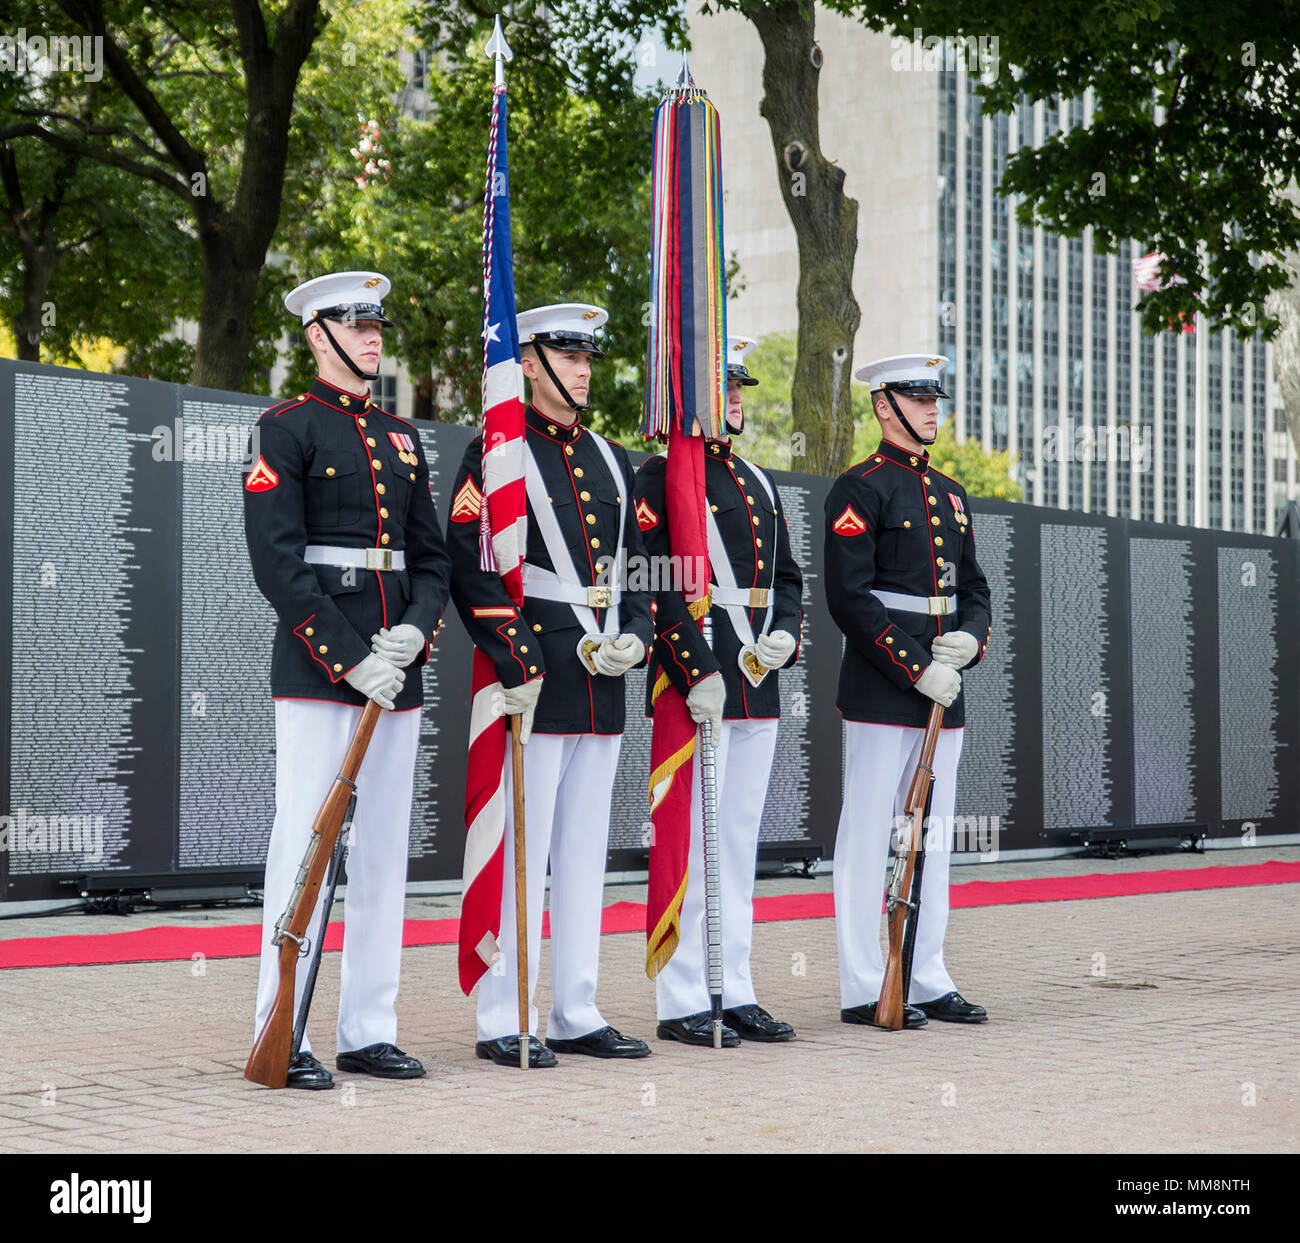 The U.S. Marine Corps Color Guard post at a ceremonial position alongside the Traveling Vietnam Memorial Wall after the conclusion of a Vietnam War pinning ceremony as a part of Marine Week, Detroit, MI., Sept. 8, 2017. The memorial was set up alongside the Detroit Riverwalk where ten Vietnam veterans received commemorative pins to honor their service and sacrifice to our country. (Official U.S. Marine Corps photo by Cpl. Robert Knapp/Released) Stock Photo